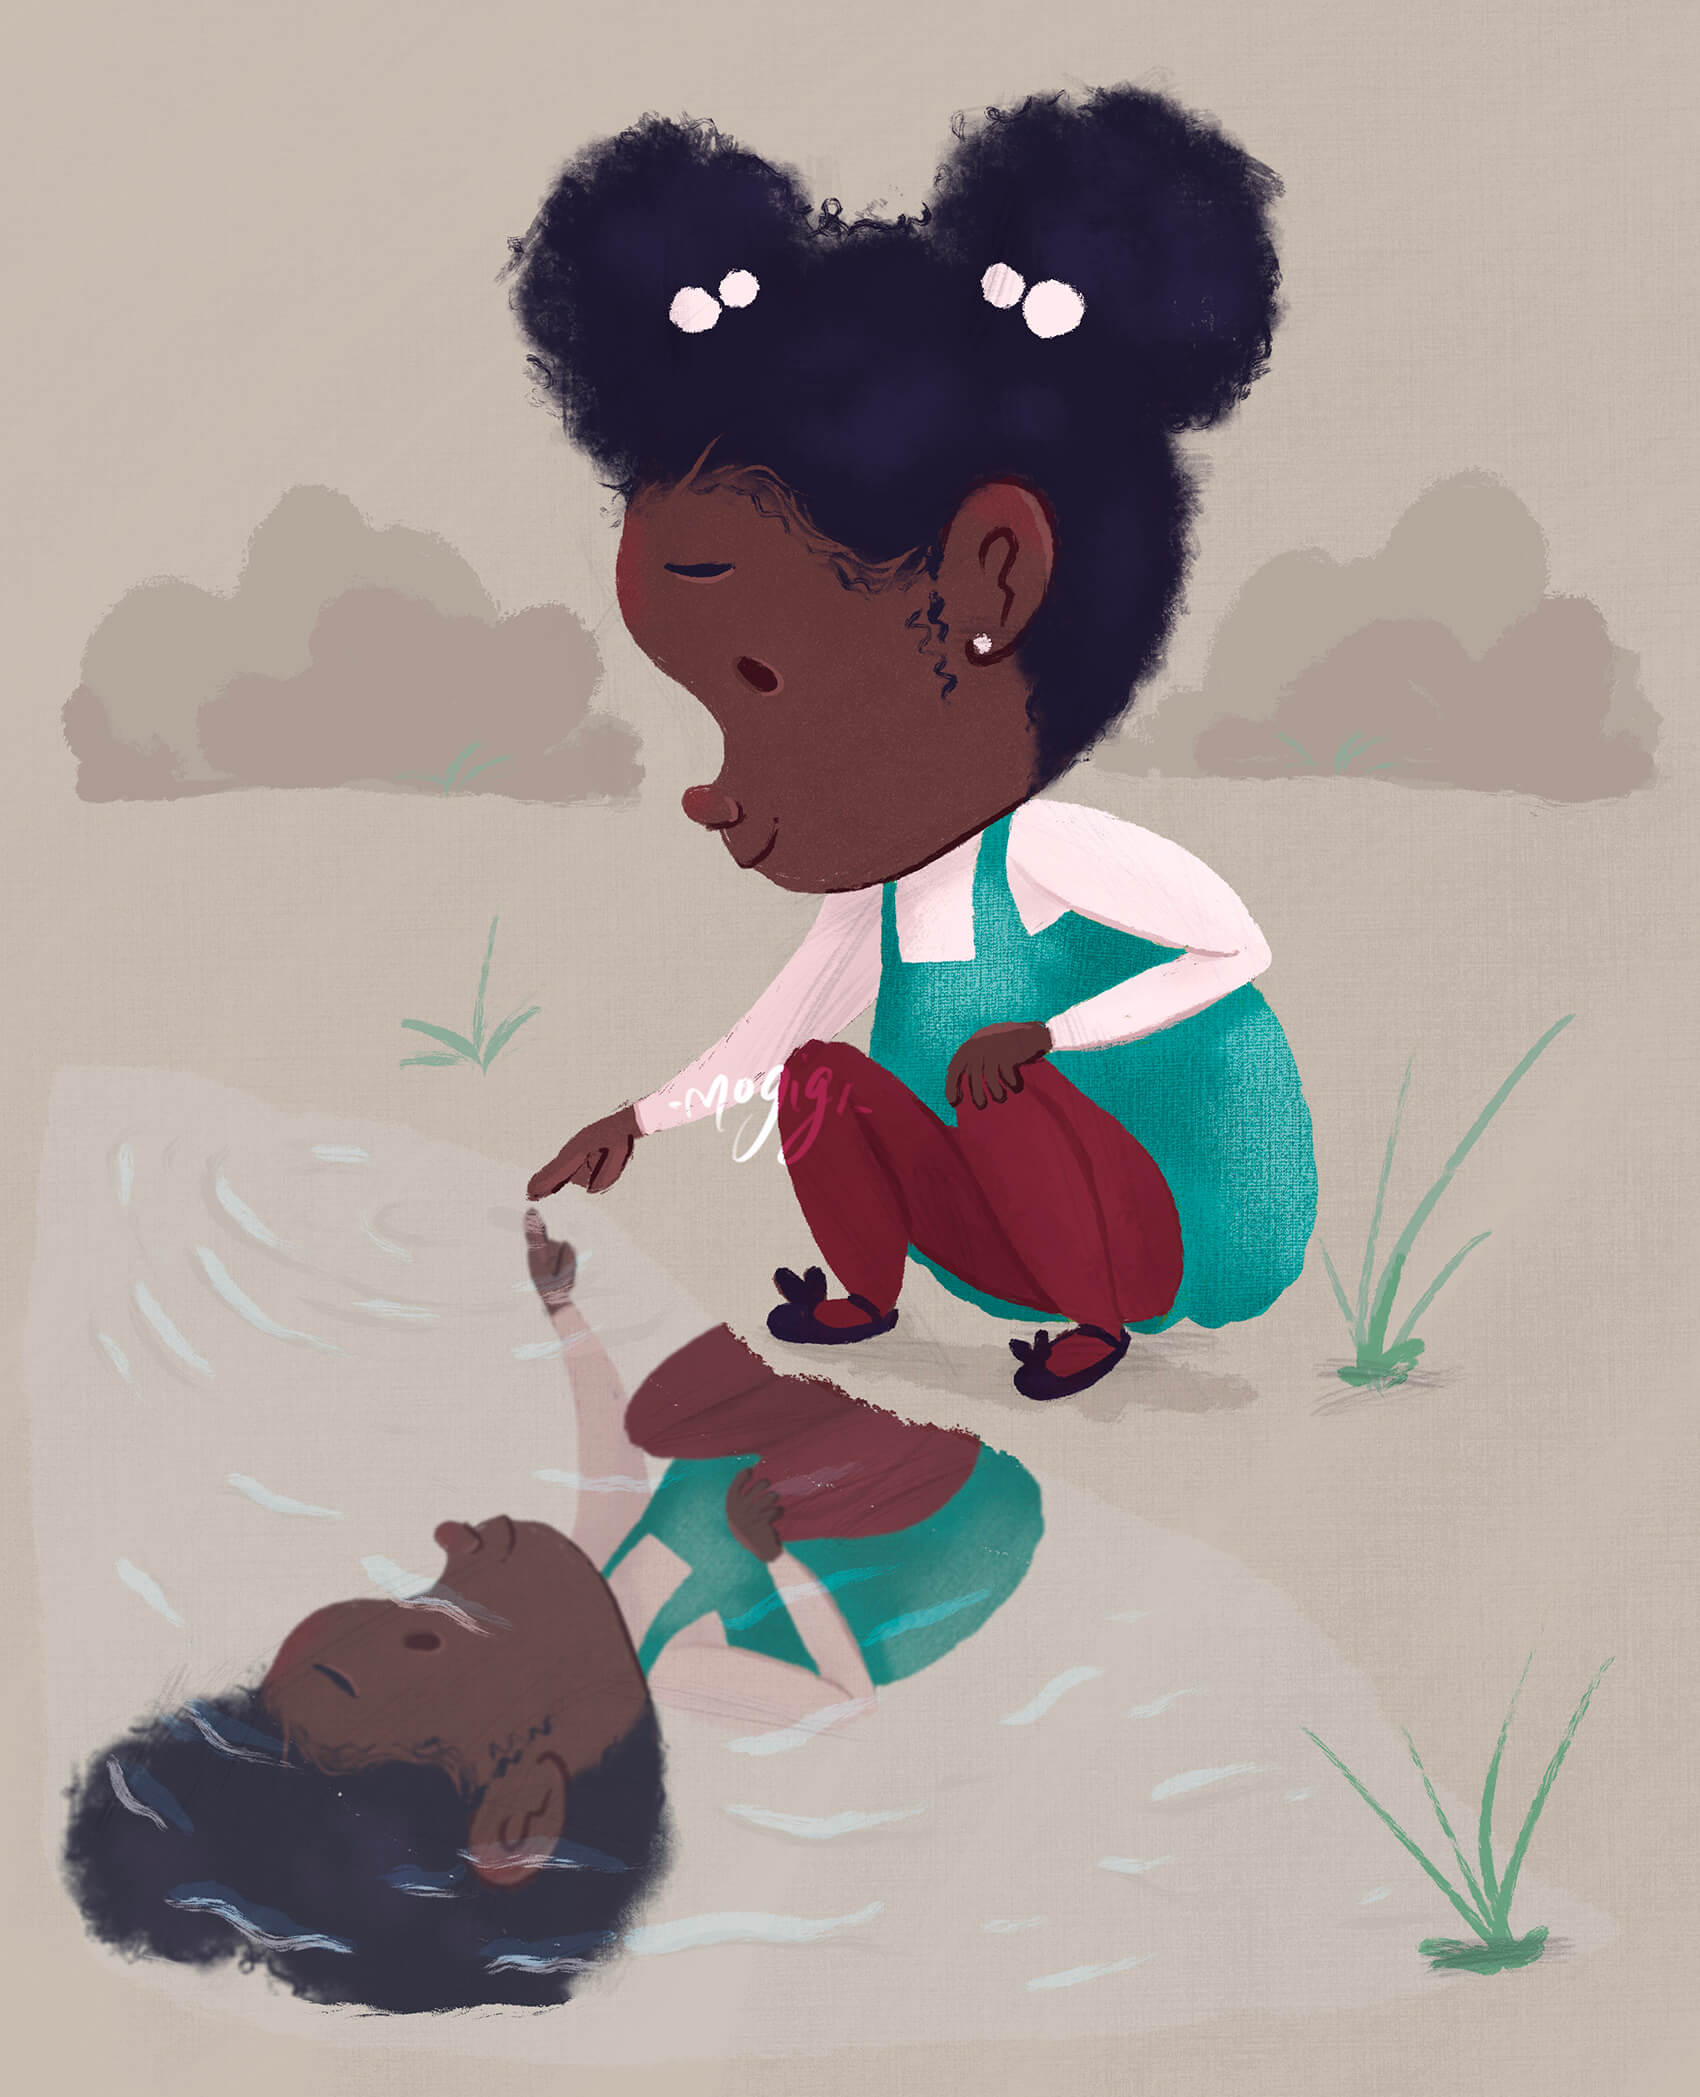 Puddle children's spot illustration by gigi moore mogigi.com of little black girl playing in a puddle of water. She's wearing a cute blue jumper dress with red tights and two space bun afro puff ponytails.